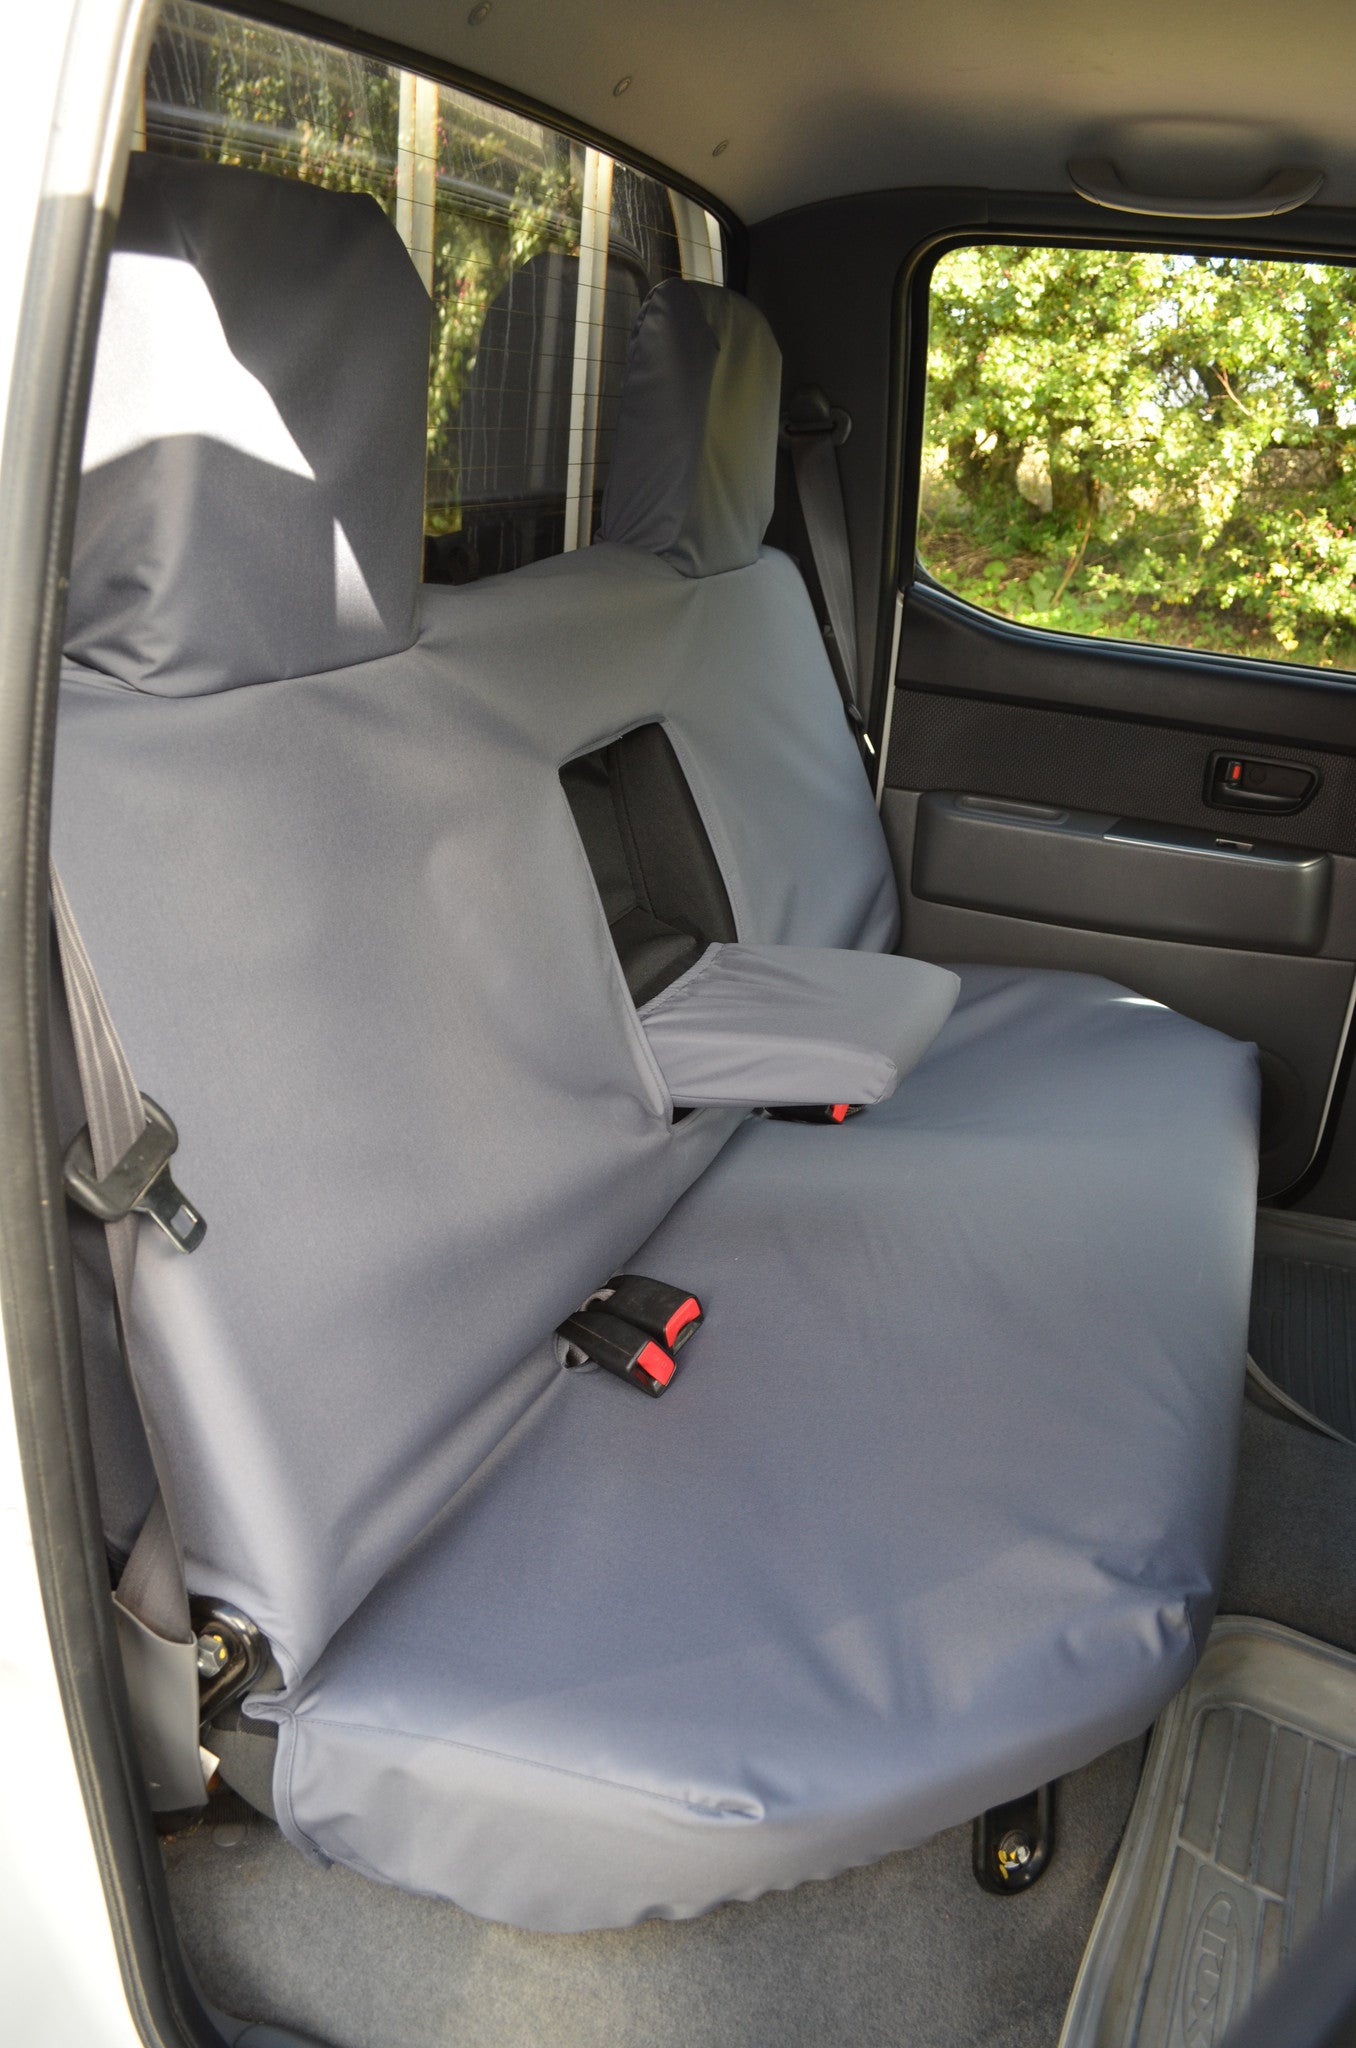 Ford Ranger 2006 to 2012 Seat Covers Rear Seat Cover / Grey Turtle Covers Ltd